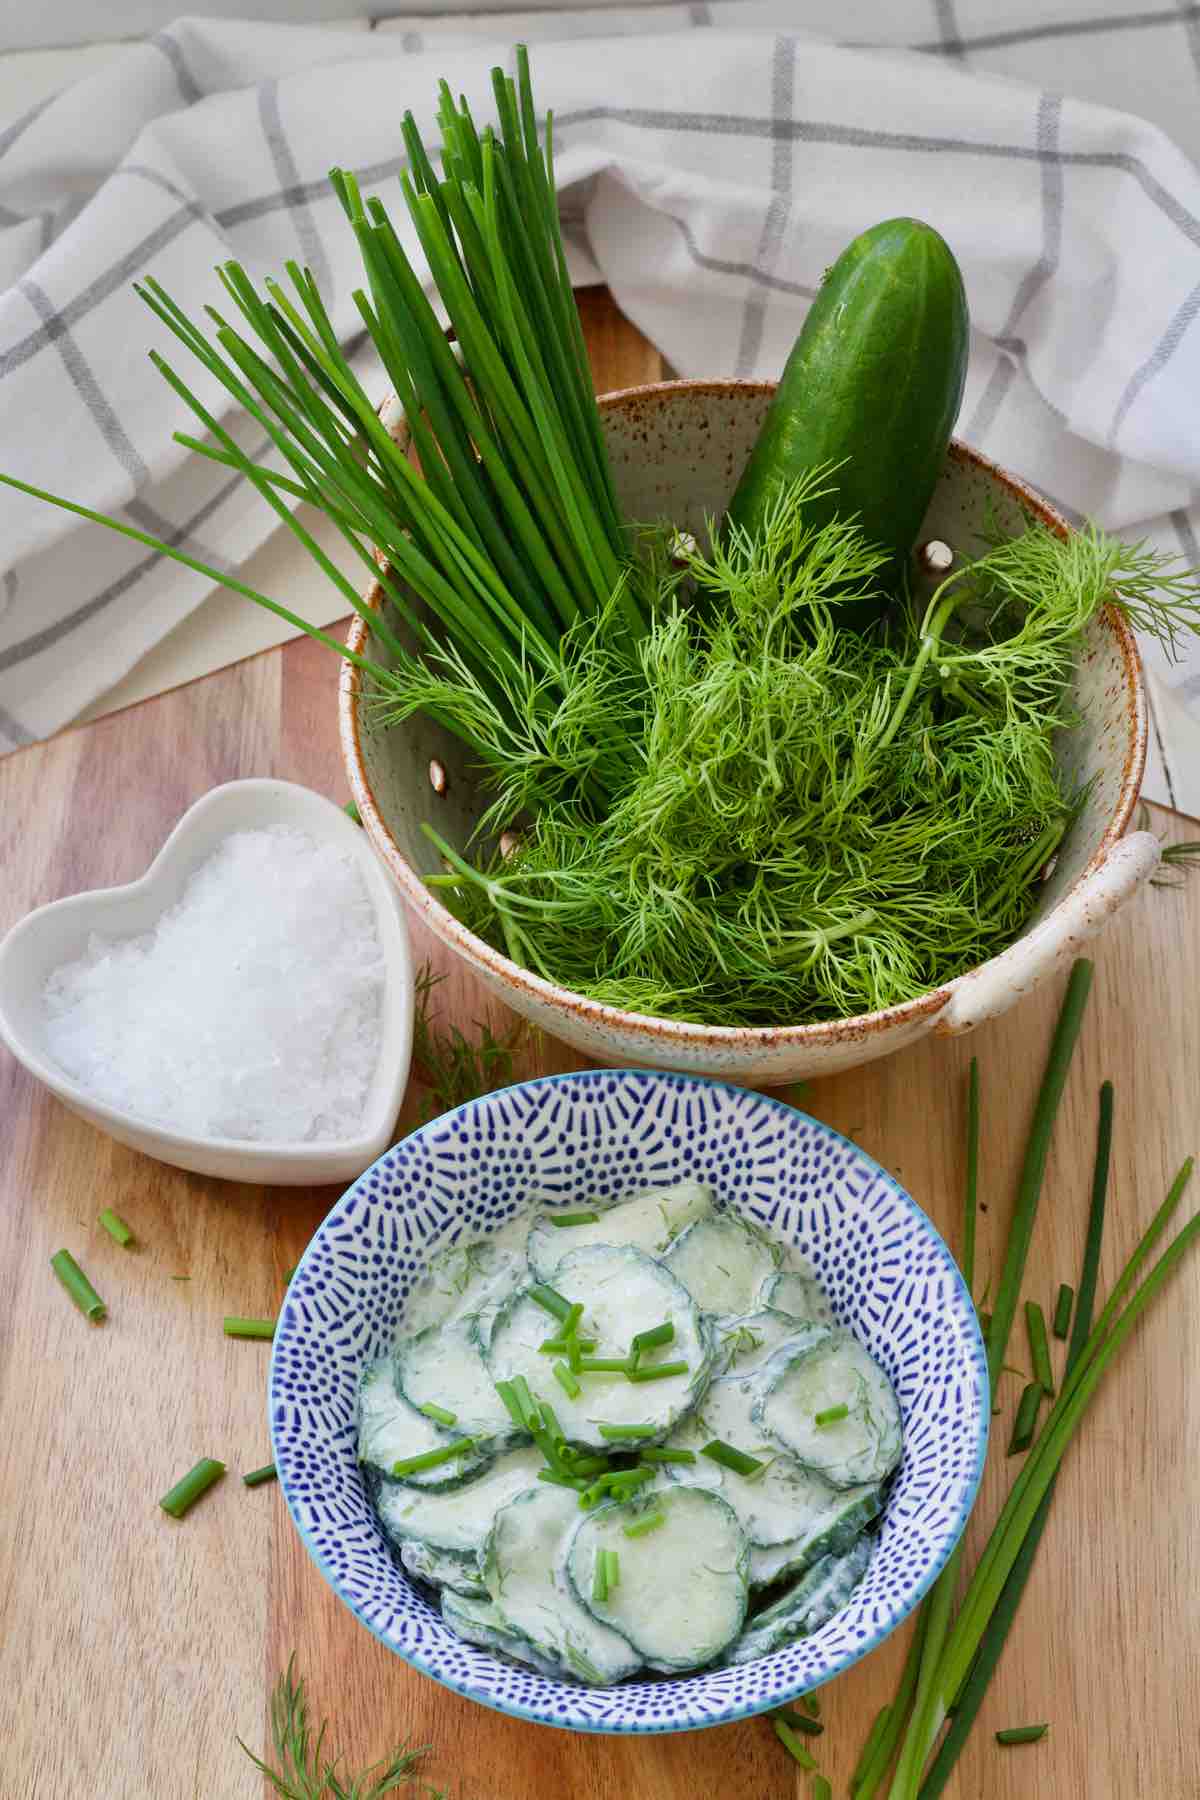 Mizeria, dish with sea salt and colander with herbs and cucumber.